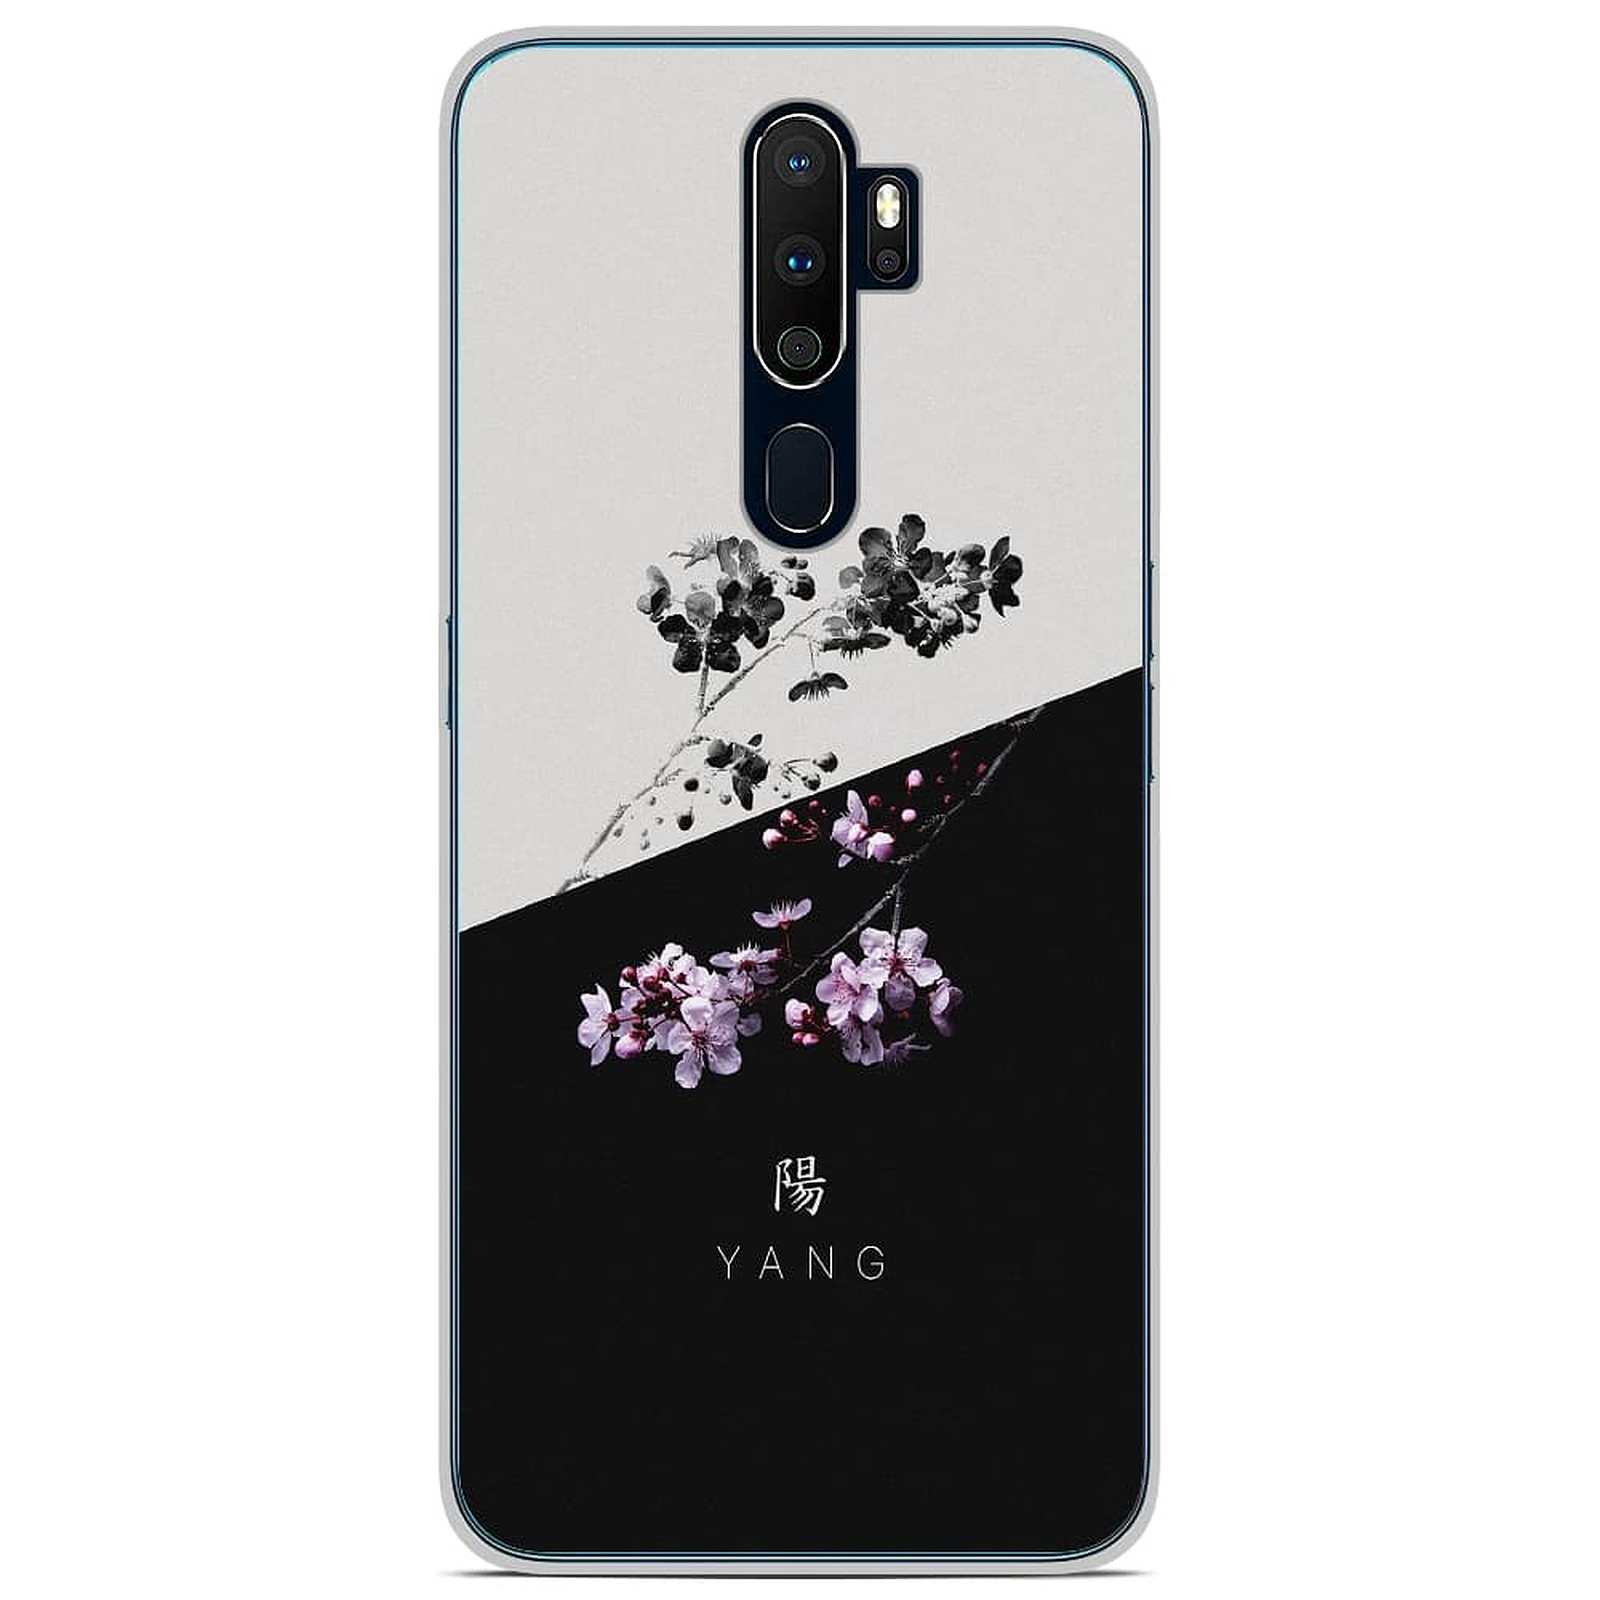 1001 Coques Coque silicone gel Oppo A5 2020 motif Yin et Yang - Coque telephone 1001Coques